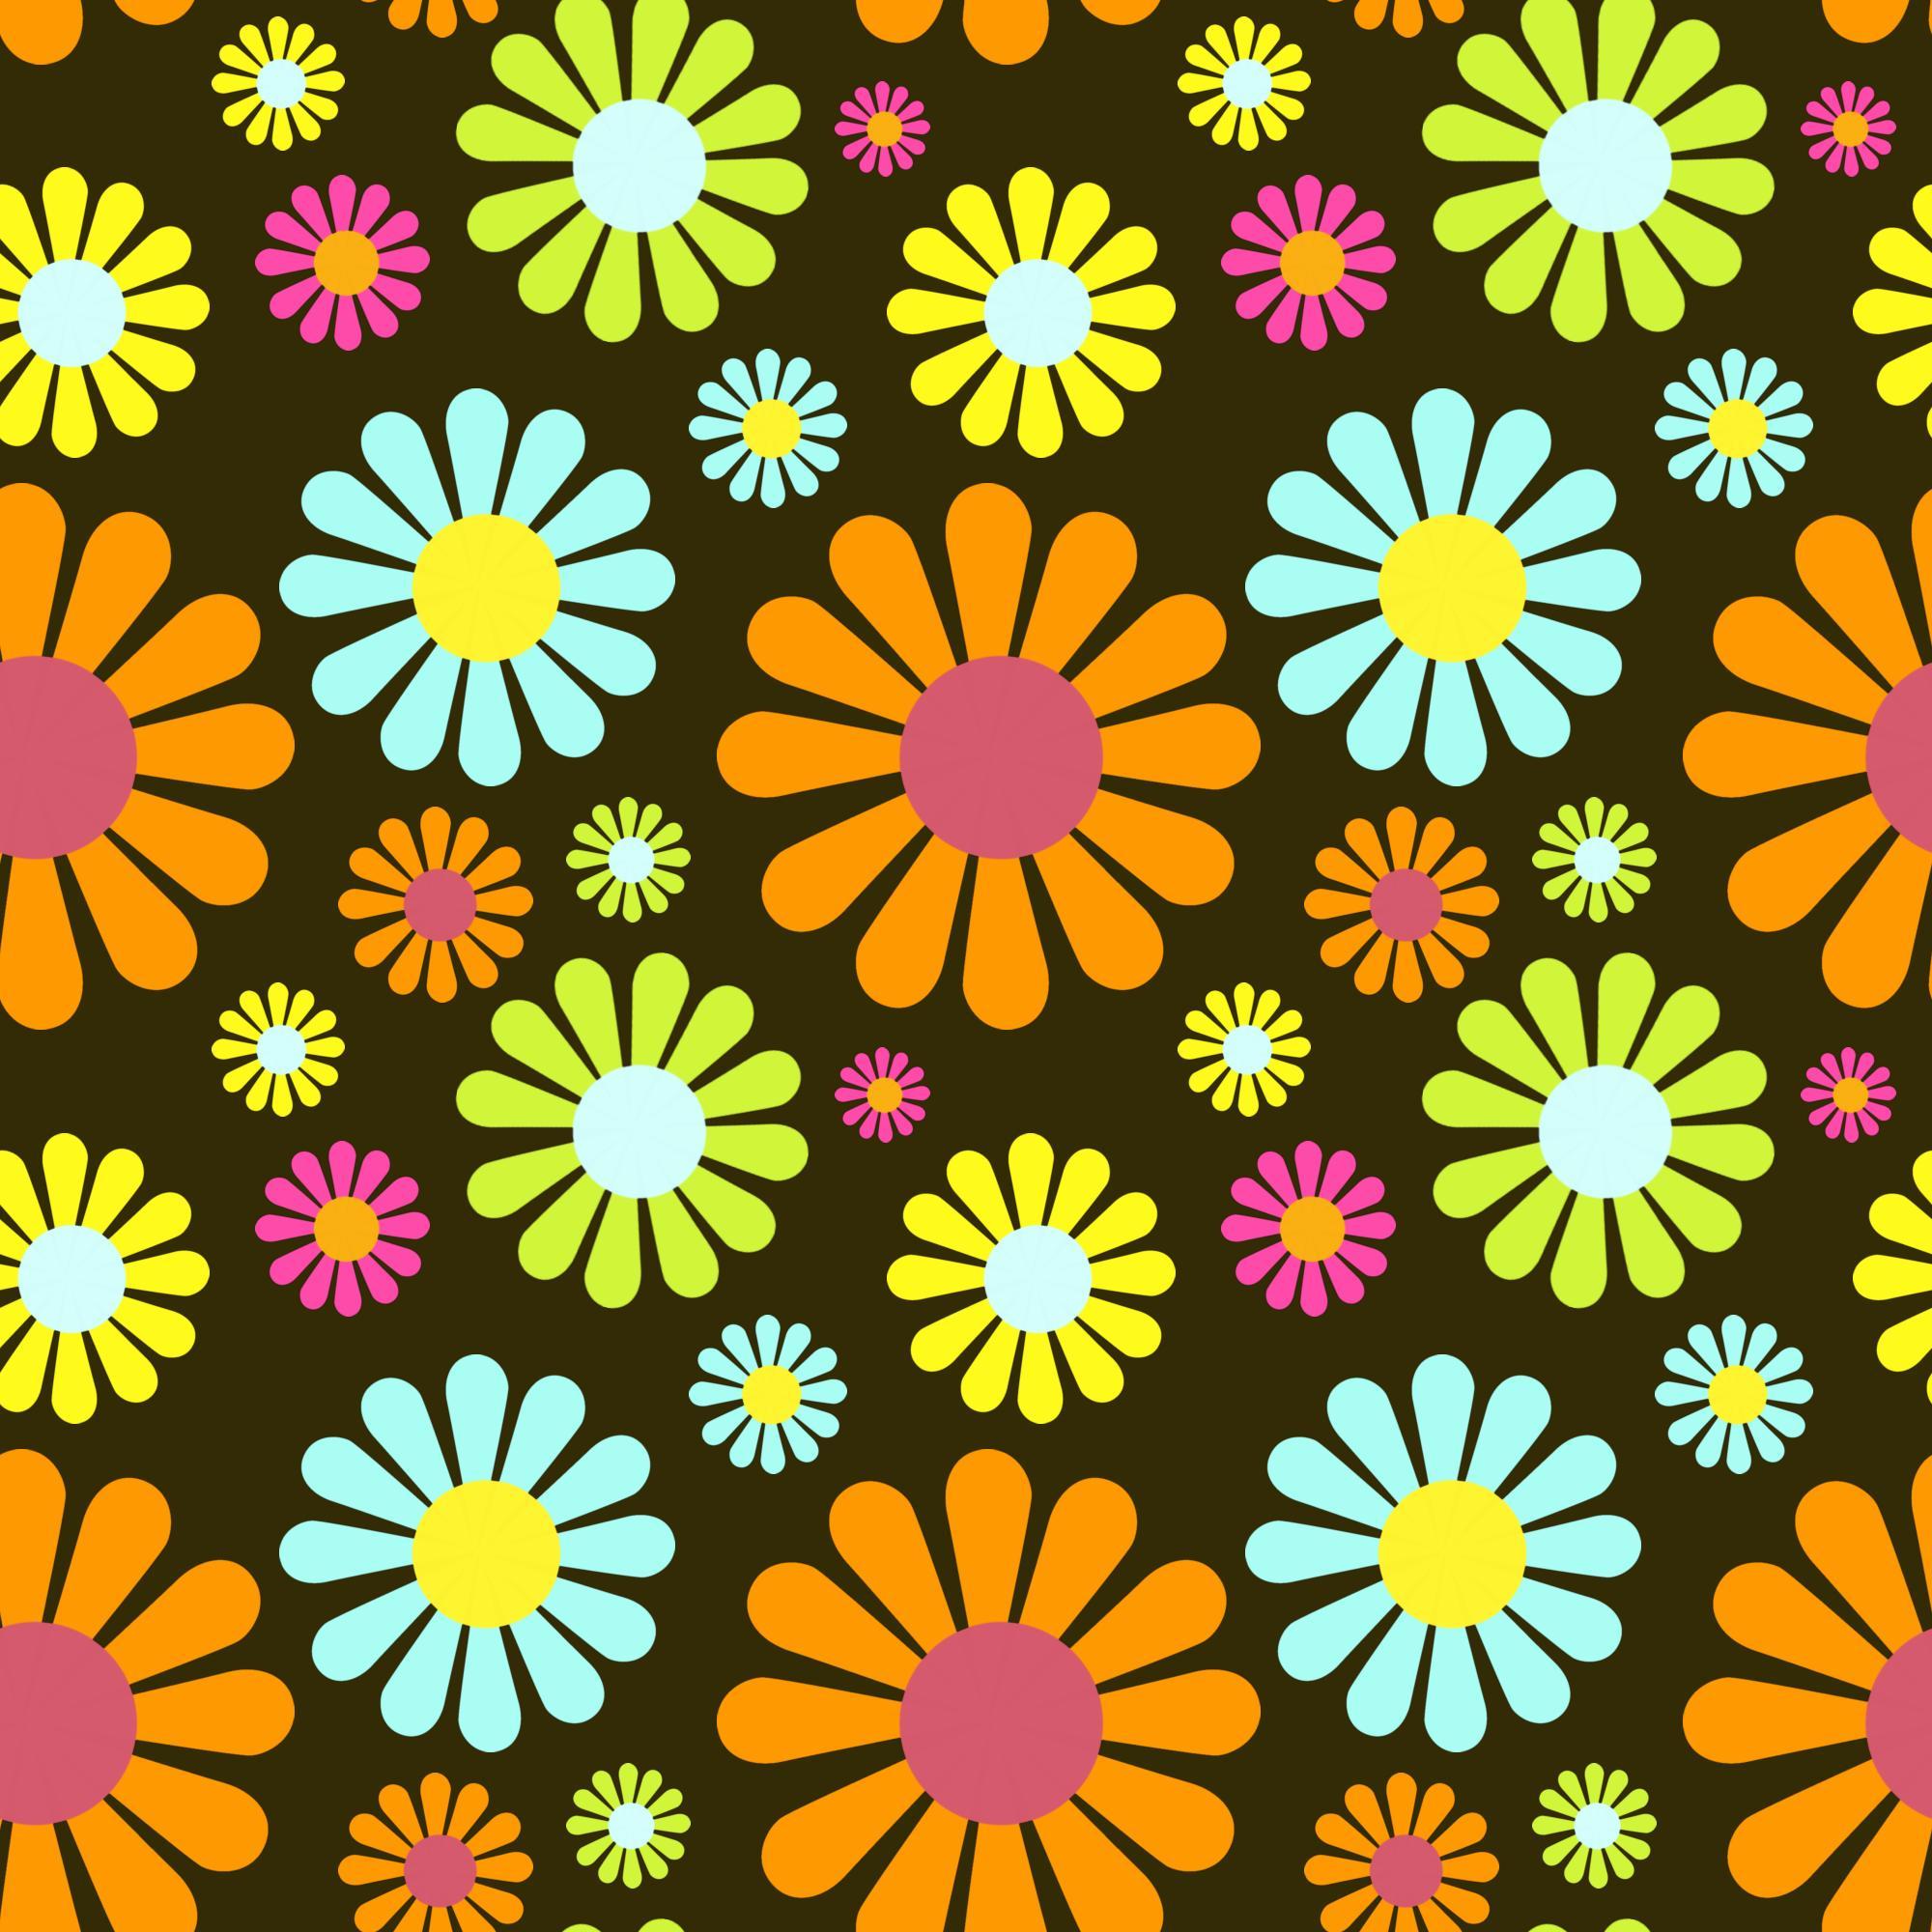 Groovy Flowers Wallpapers - Top Free Groovy Flowers Backgrounds ...